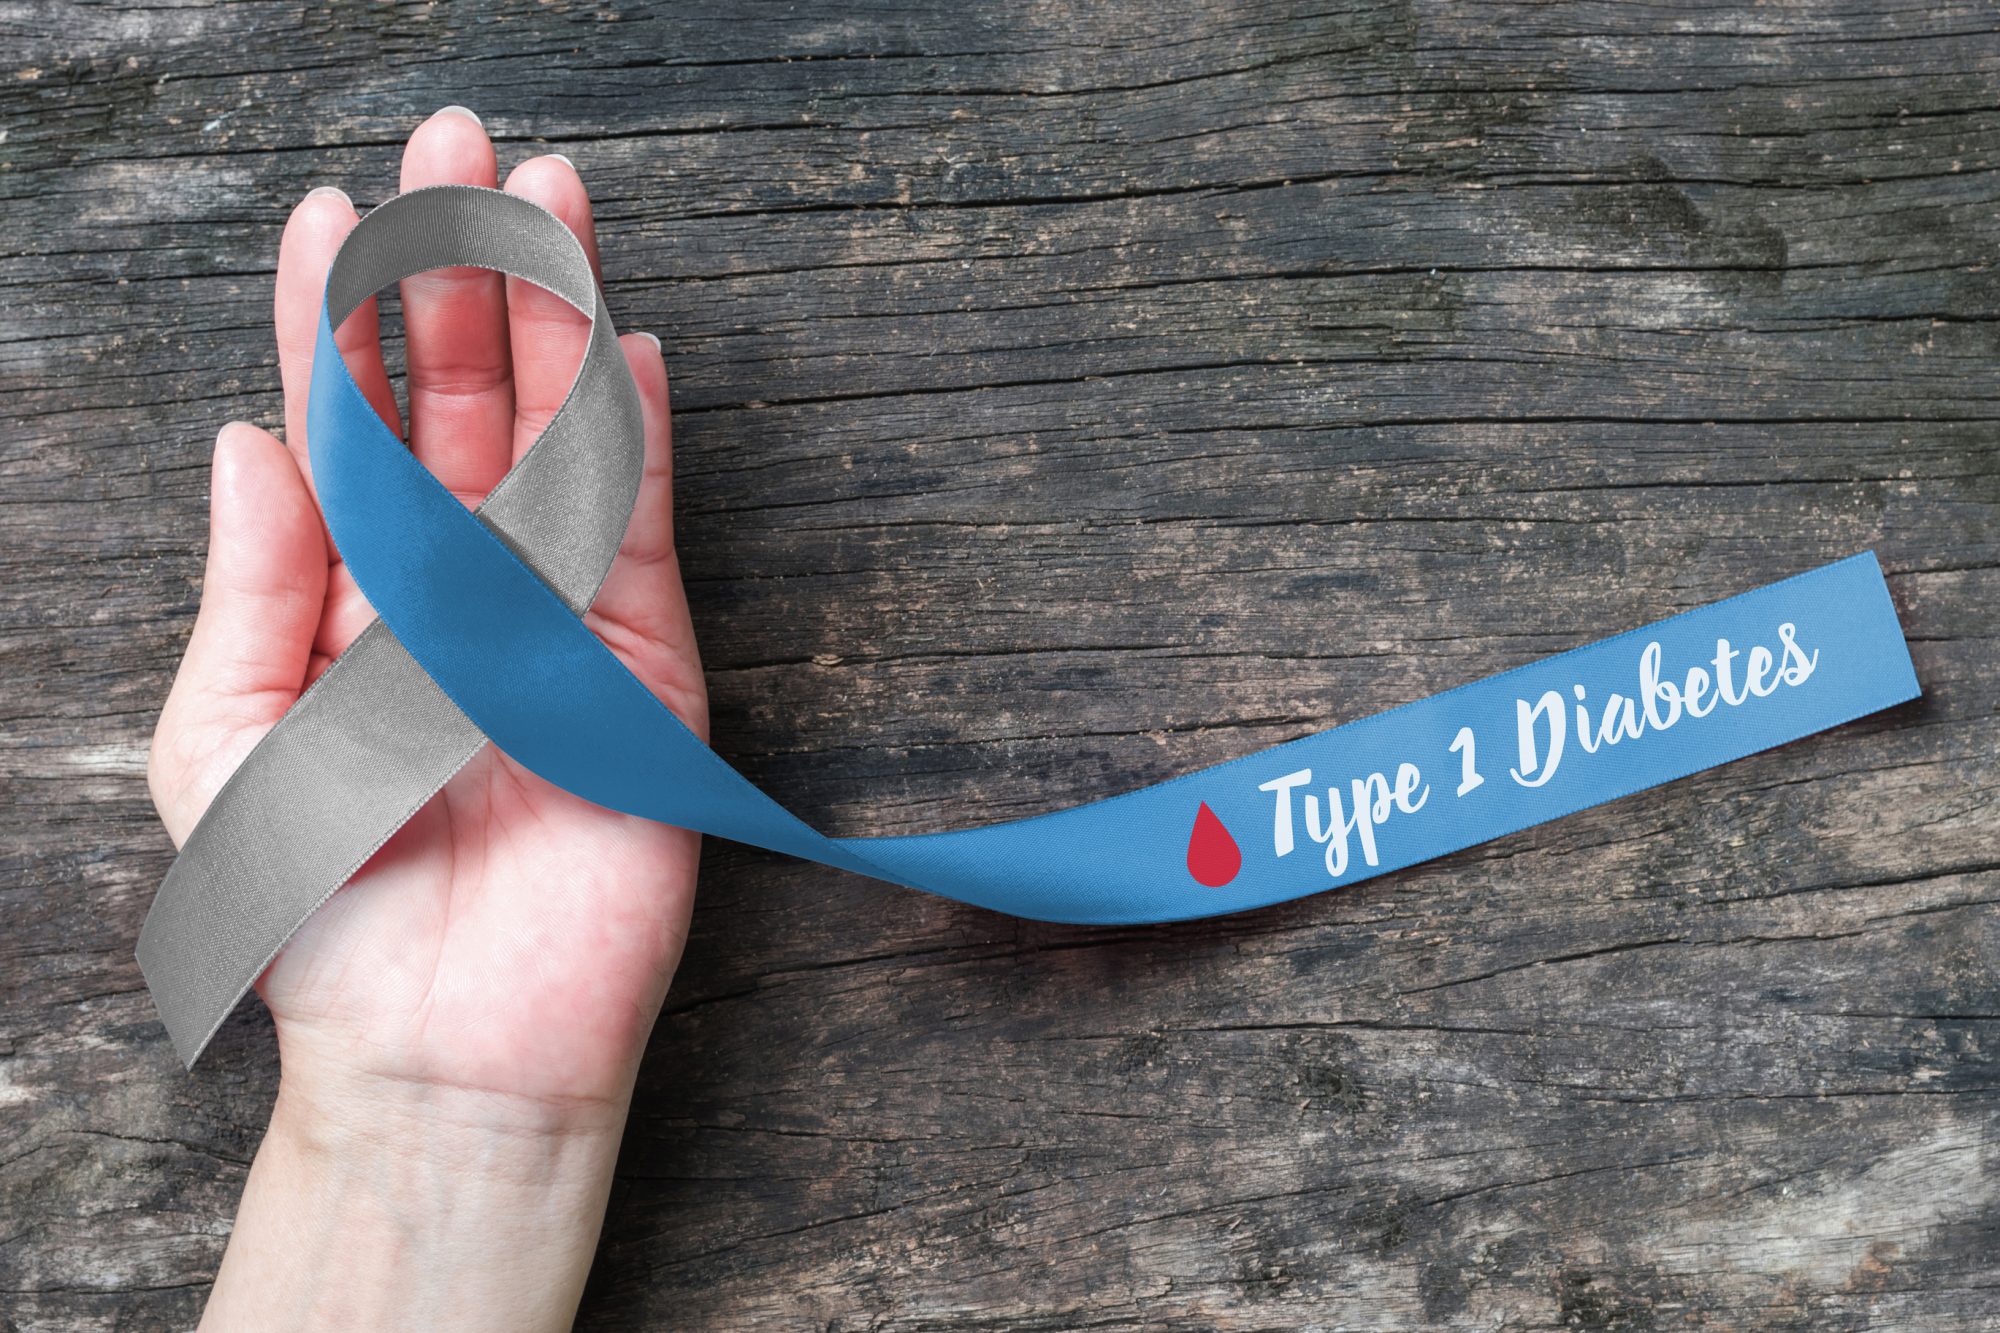 news on type 1 diabetes cure)